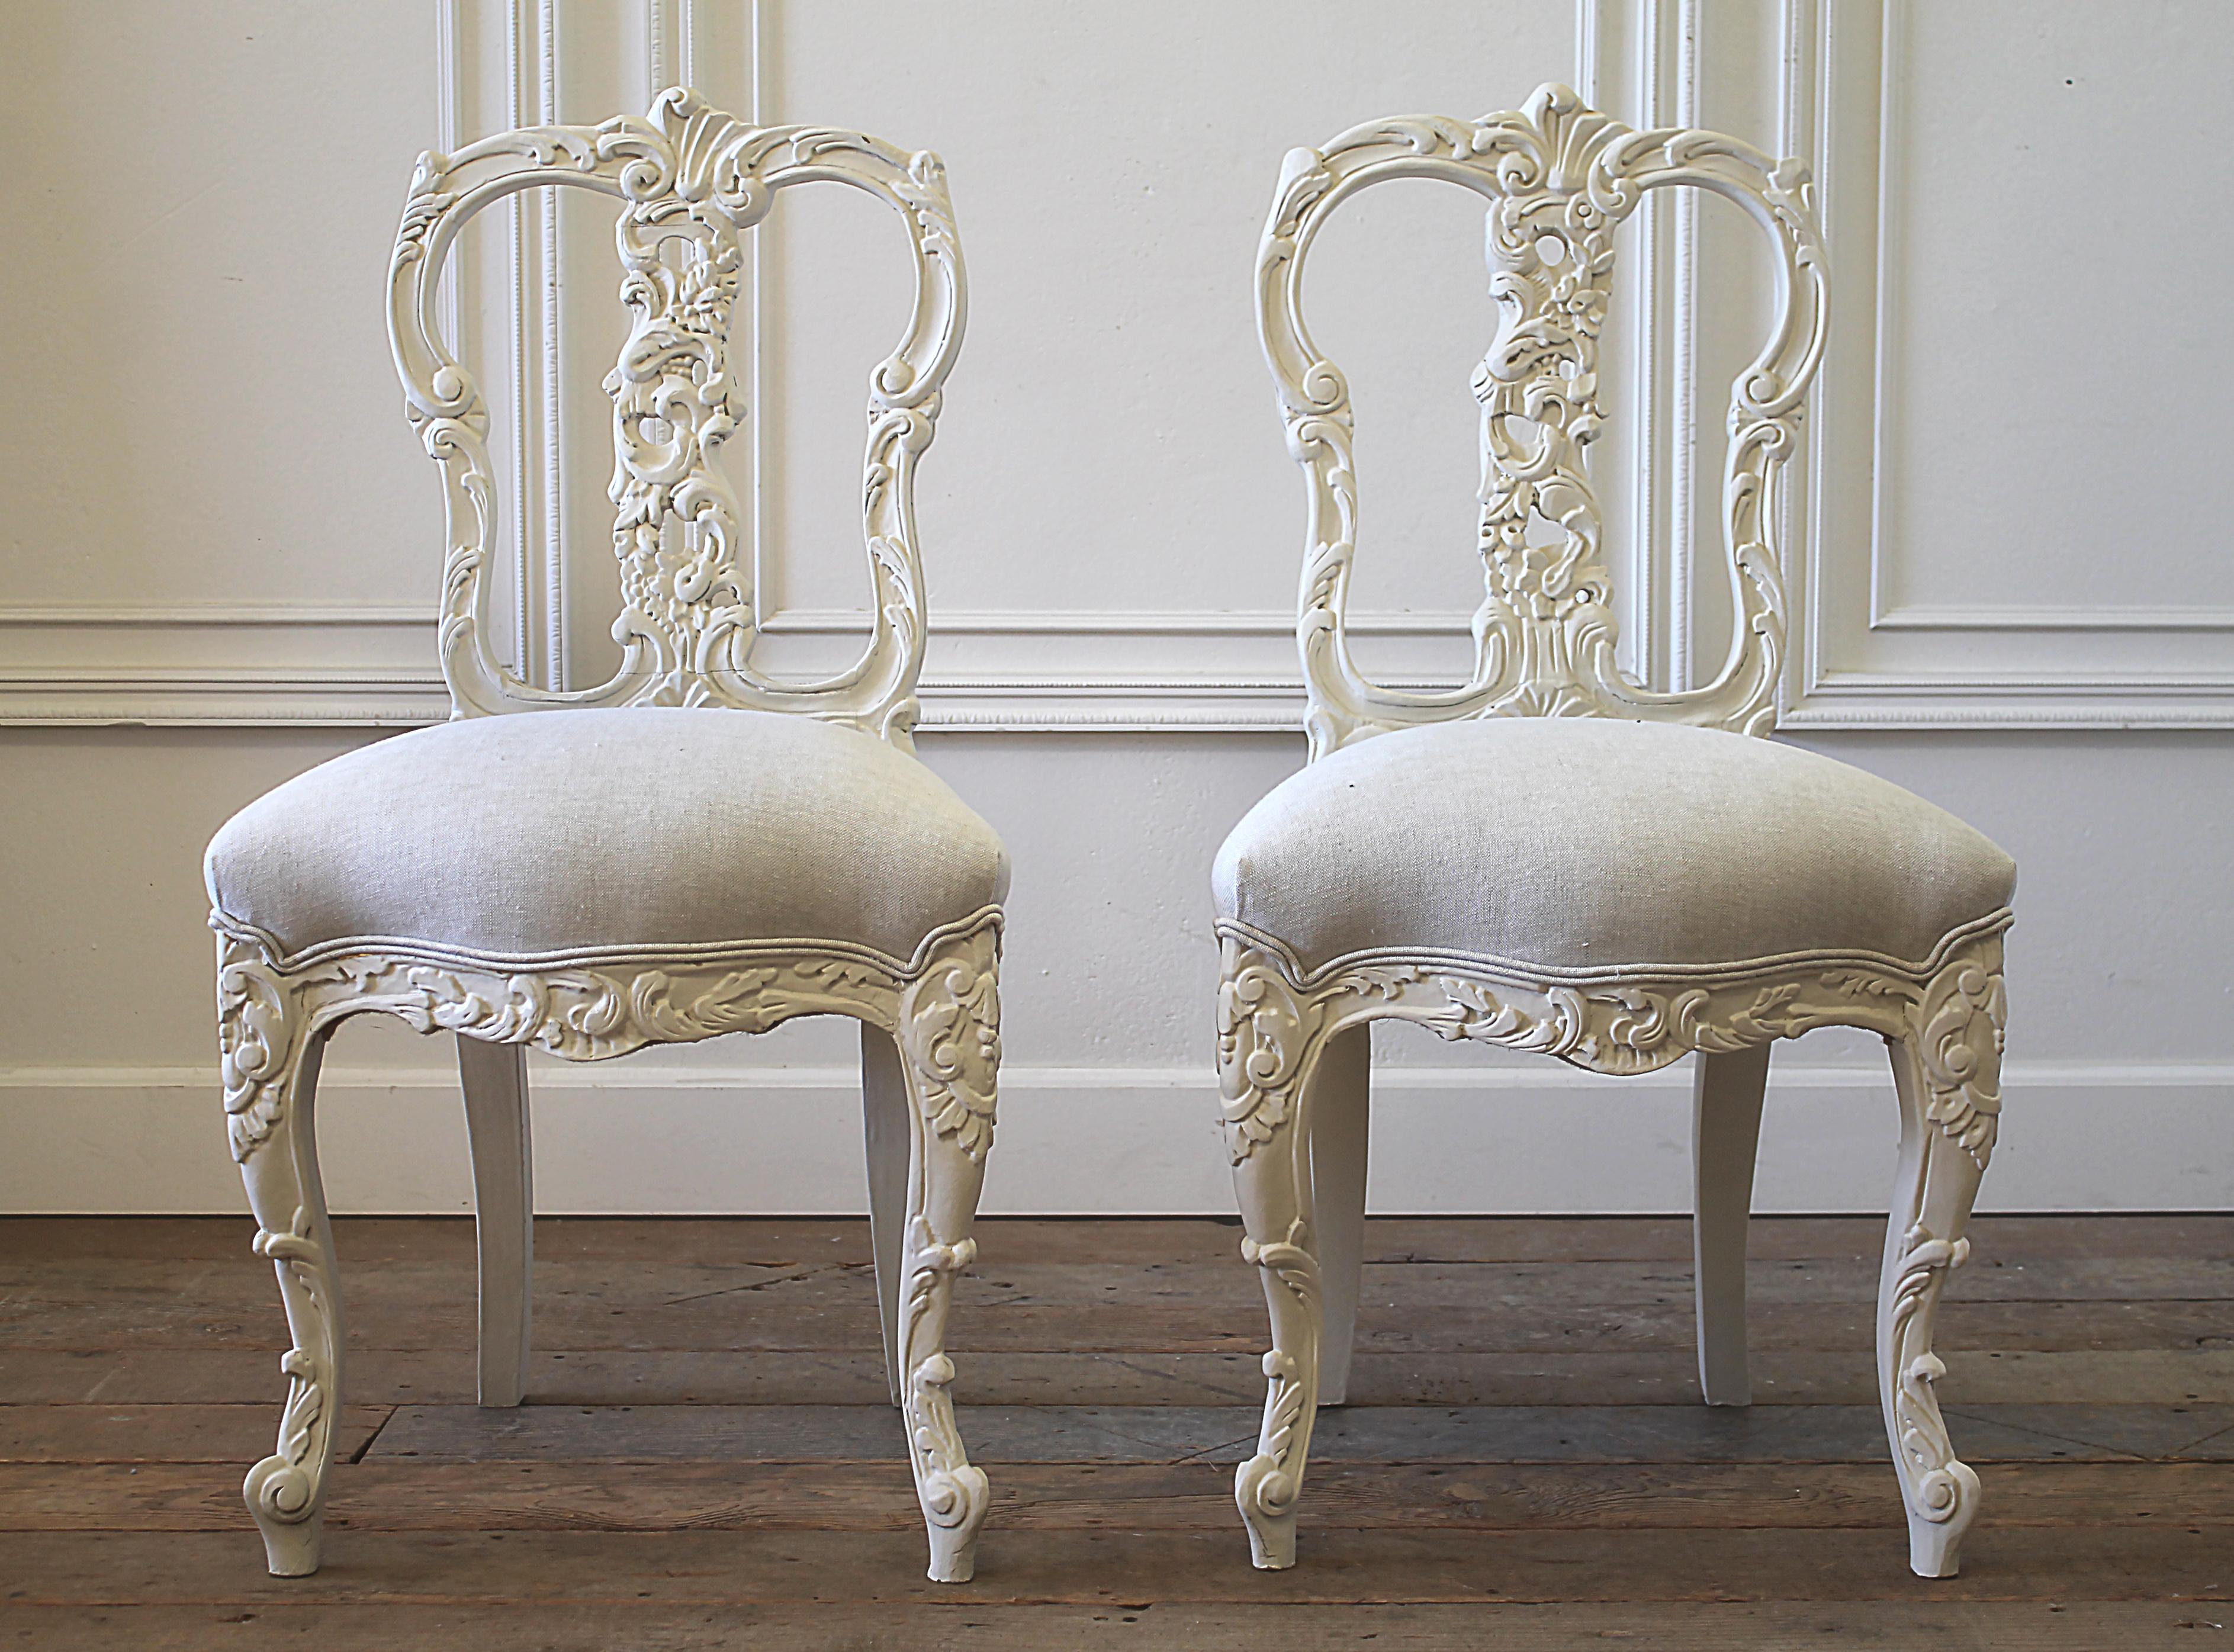 20th Century Set of 8 White Carved and Painted Dining Chairs